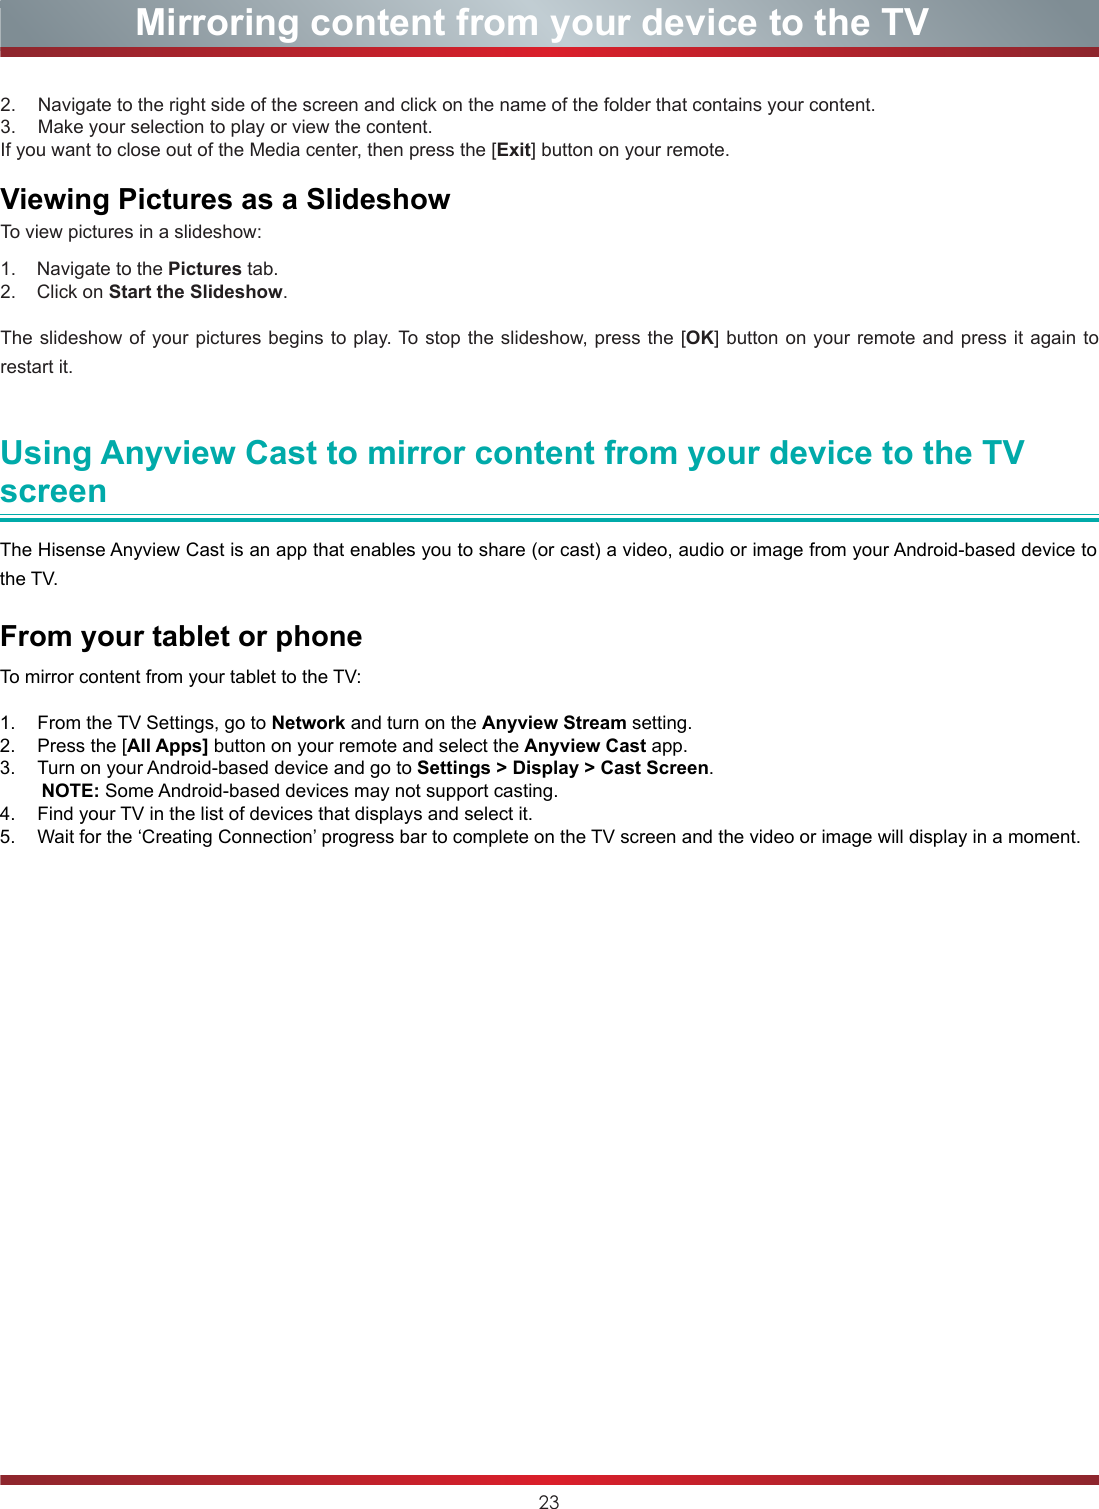 23Mirroring content from your device to the TVUsing Anyview Cast to mirror content from your device to the TV screenThe Hisense Anyview Cast is an app that enables you to share (or cast) a video, audio or image from your Android-based device to the TV.From your tablet or phoneTo mirror content from your tablet to the TV:1.  From the TV Settings, go to Network and turn on the Anyview Stream setting.2.  Press the [All Apps] button on your remote and select the Anyview Cast app.3.  Turn on your Android-based device and go to Settings &gt; Display &gt; Cast Screen.           NOTE: Some Android-based devices may not support casting.4.  Find your TV in the list of devices that displays and select it.5.  Wait for the ‘Creating Connection’ progress bar to complete on the TV screen and the video or image will display in a moment.2.  Navigate to the right side of the screen and click on the name of the folder that contains your content.3.  Make your selection to play or view the content.If you want to close out of the Media center, then press the [Exit] button on your remote.Viewing Pictures as a SlideshowTo view pictures in a slideshow:1.    Navigate to the Pictures tab.2.    Click on Start the Slideshow.The slideshow of your pictures begins to play. To stop the slideshow, press the [OK] button on your remote and press it again to restart it. 